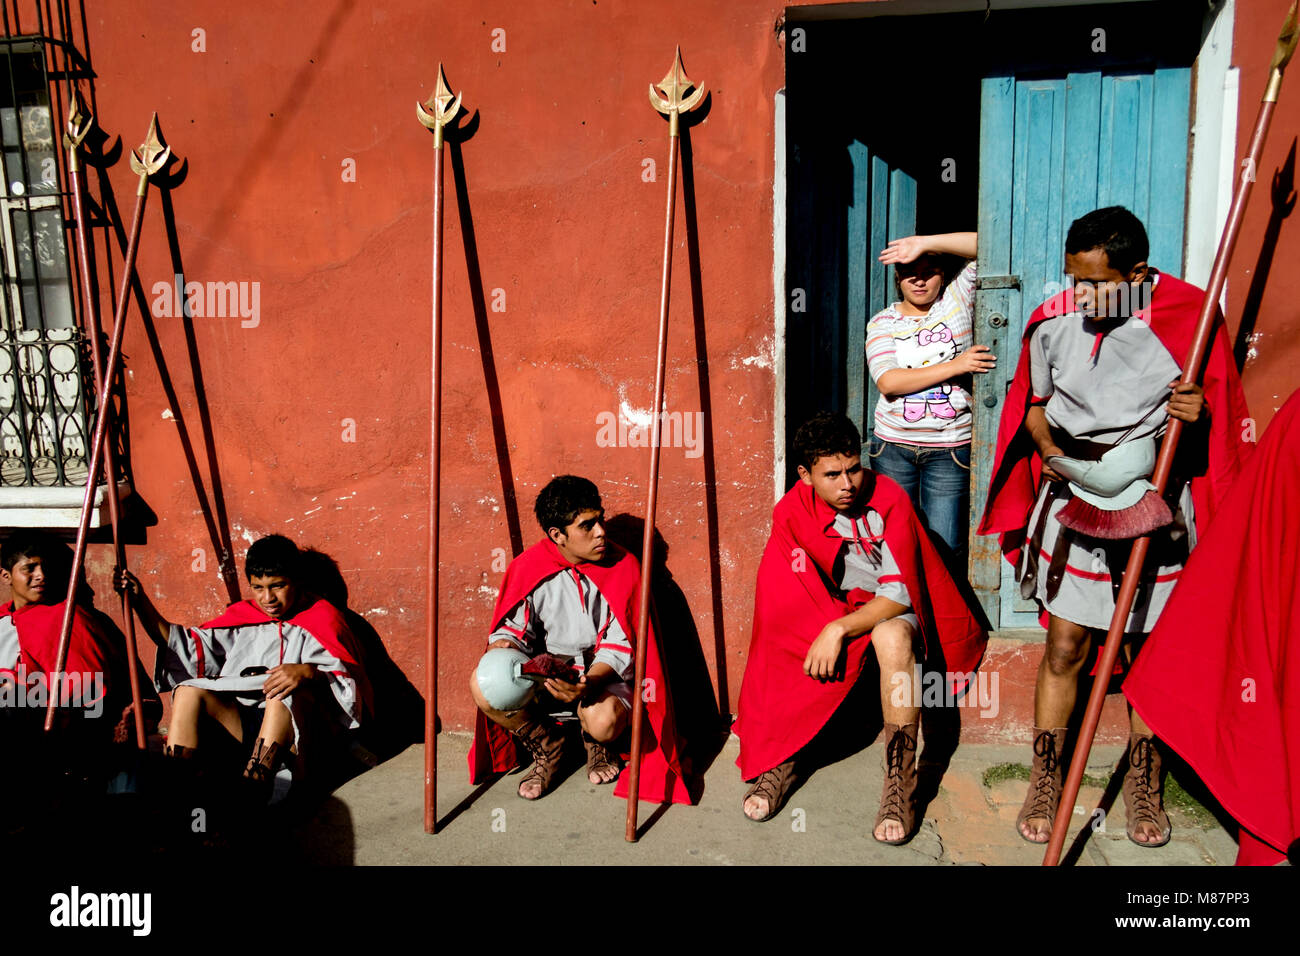 Guatemala, Antigua - March 3, 2013. Young boys in Roman uniforms prepare for the Holy Week celebrations in Antigua. (Photo credit: Gonzales Photo - Flemming Bo Jensen). Stock Photo